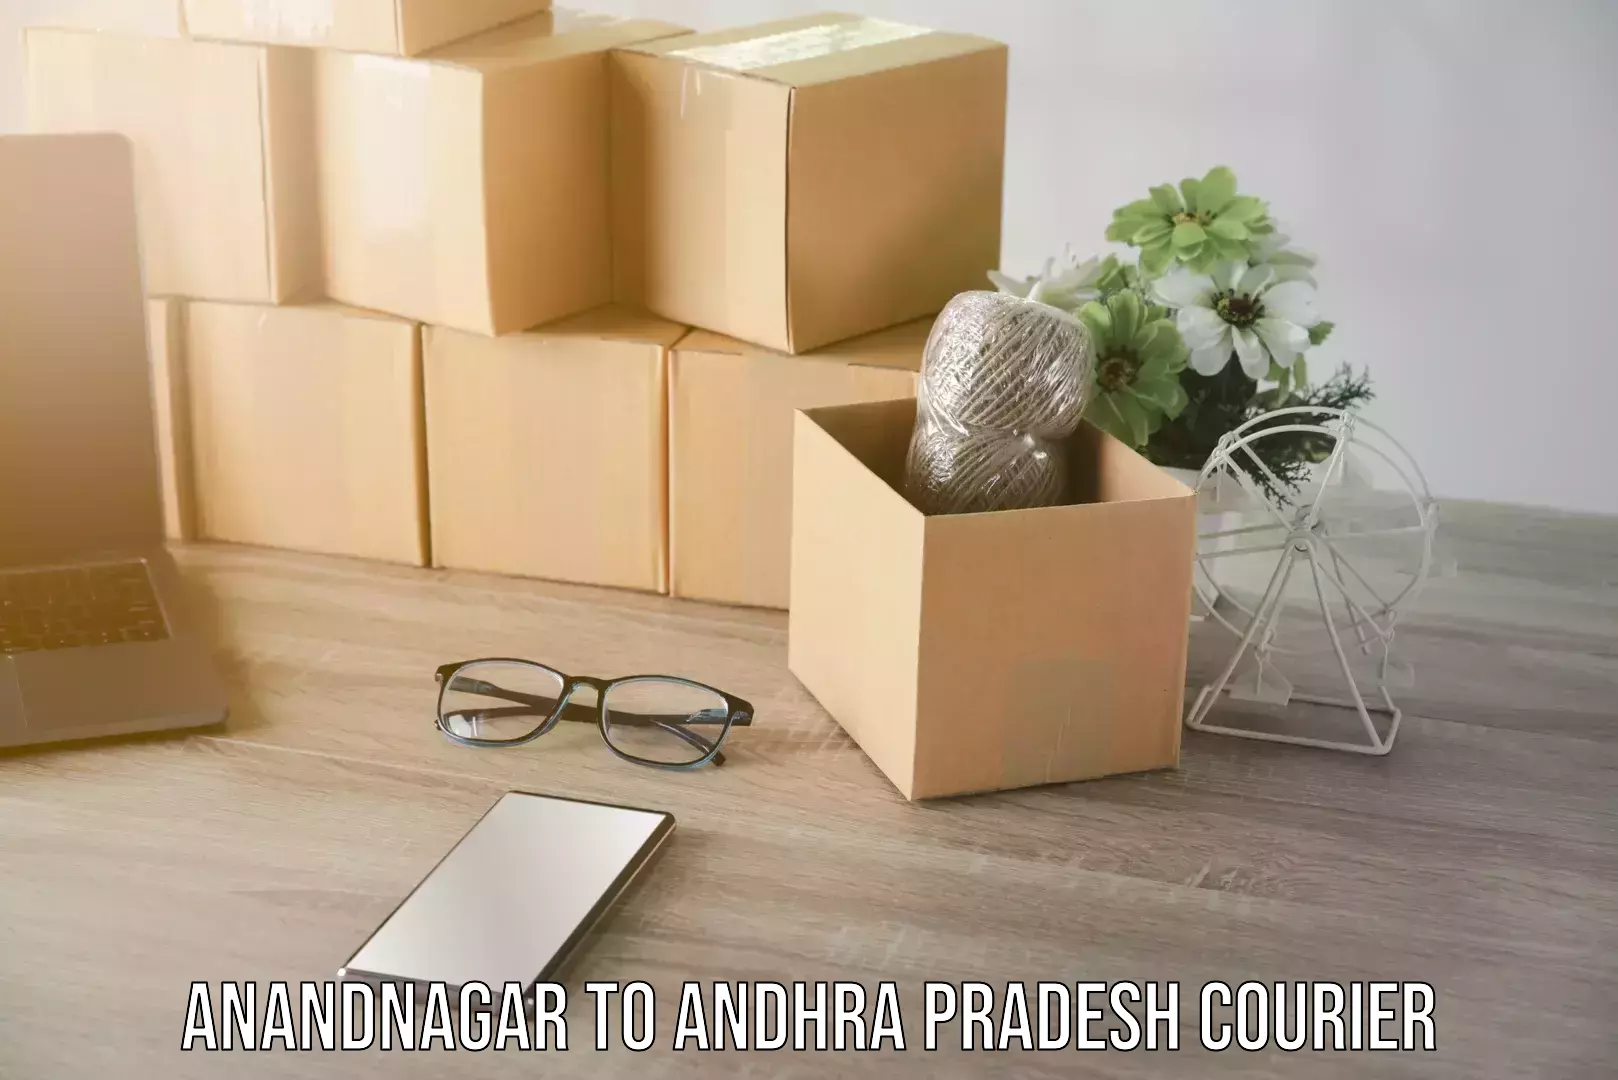 State-of-the-art courier technology Anandnagar to Andhra Pradesh